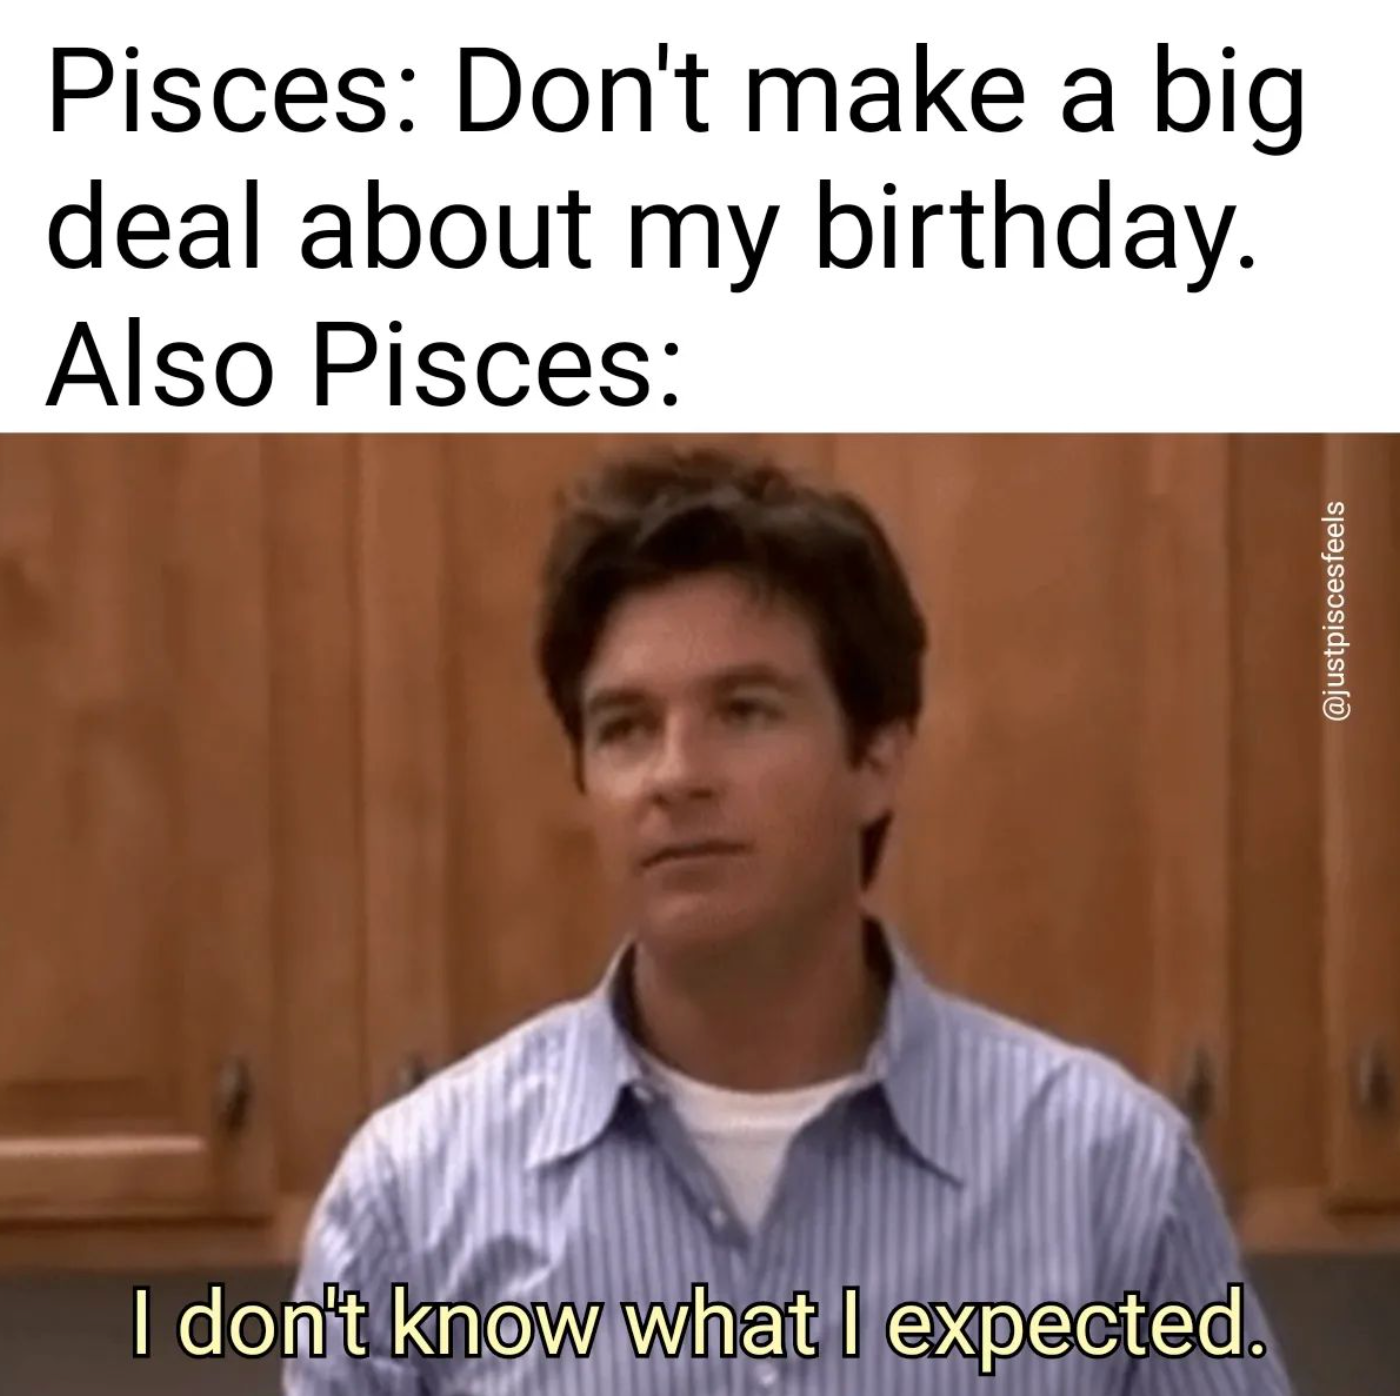 Pisces Birthday Meme Don't make a big deal about my birthday